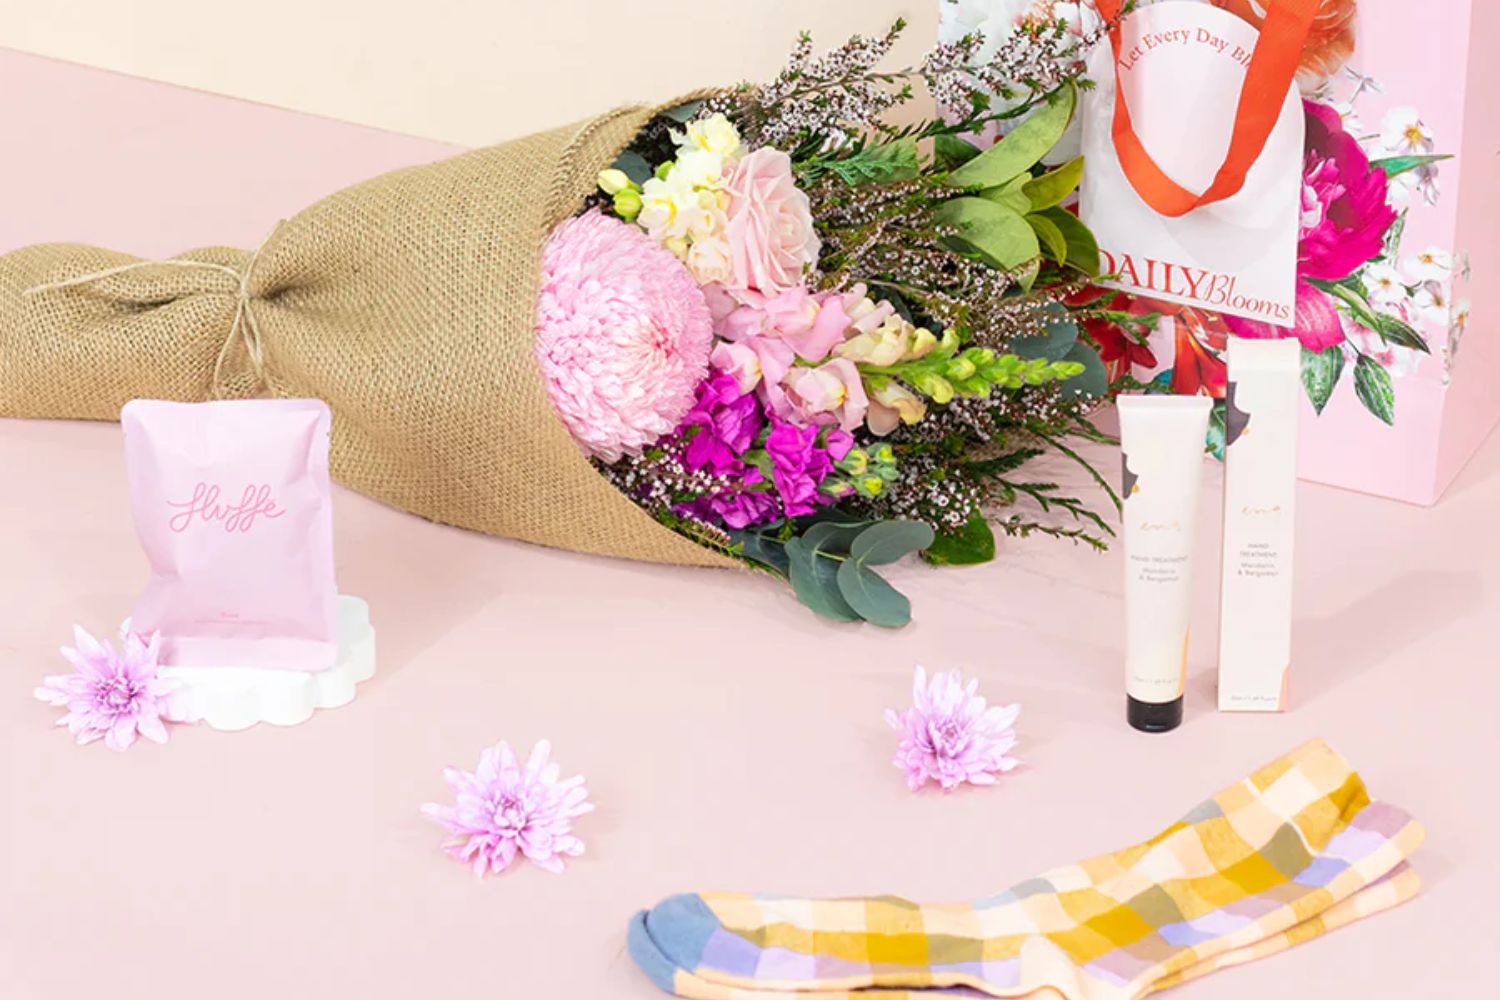 BFF Daily Blooms Hamper